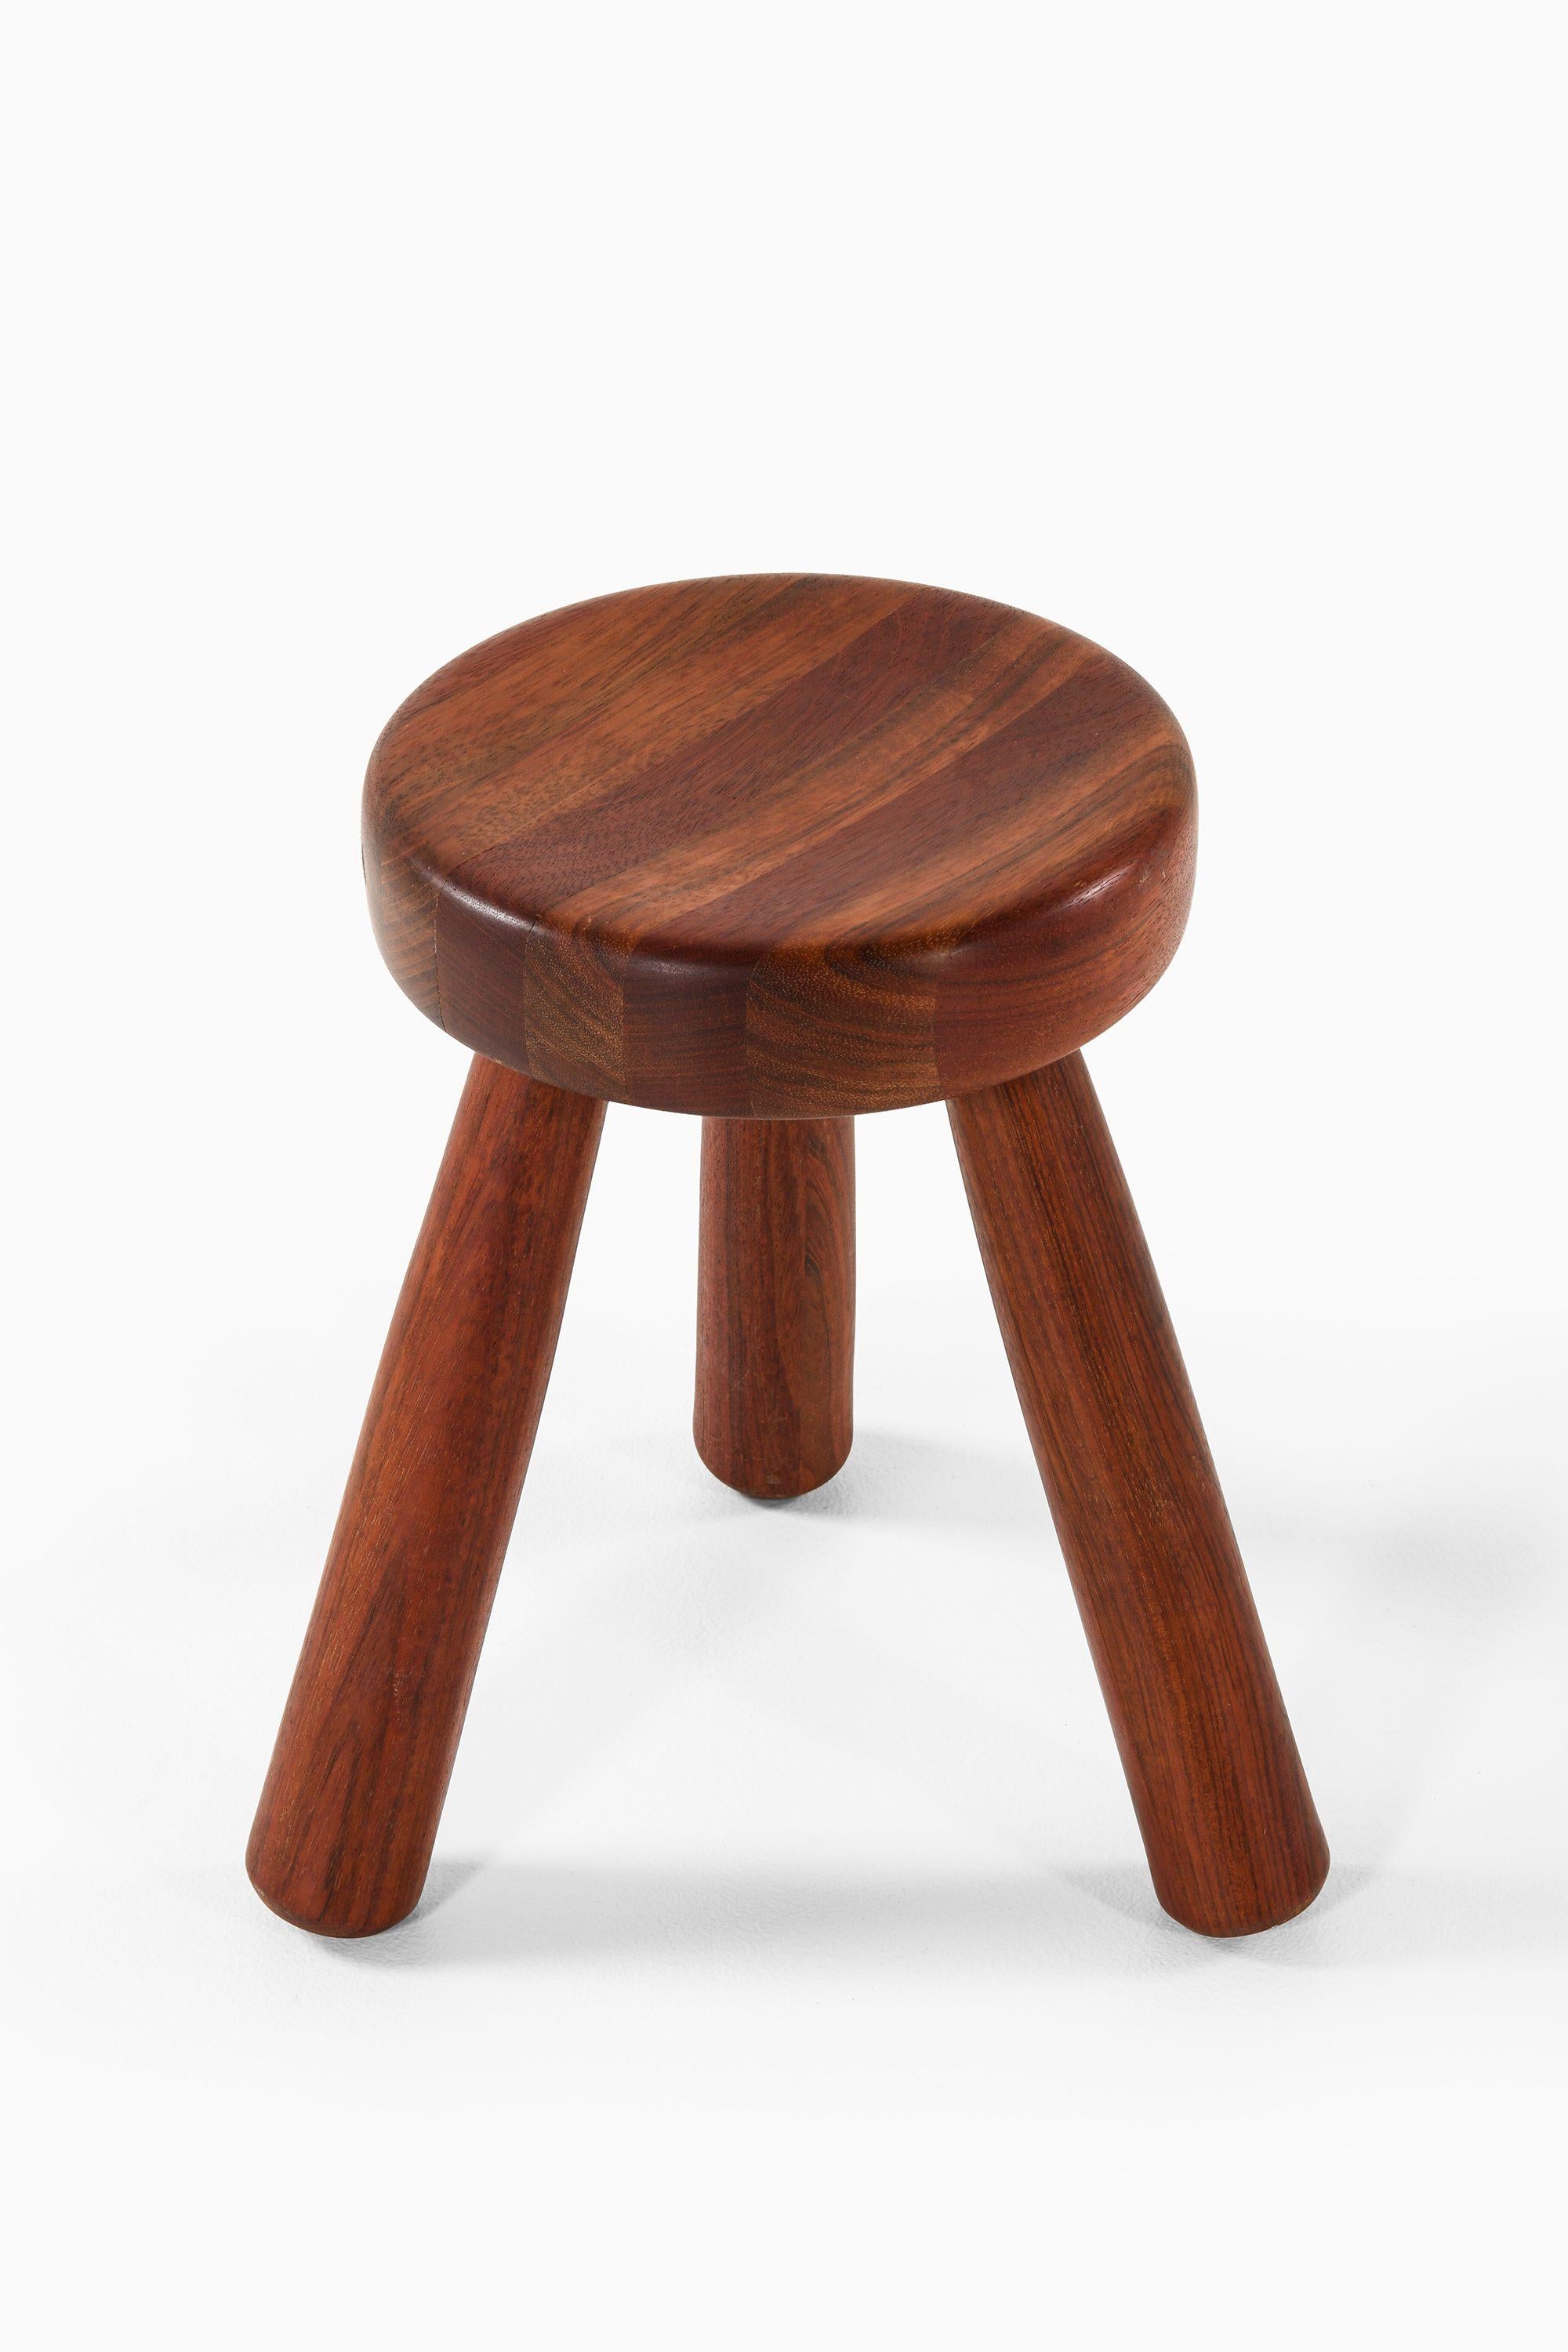 Large Stool in Jatoba Wood by Ingvar Hildingsson, 1980's

Additional Information:
Material: Jatoba wood
Style: Mid century, Scandinavia
Produced by Ingvar Hildingsson in Sweden
Dimensions (W x D x H): 27 x 27 x 40 cm
Condition: Good vintage